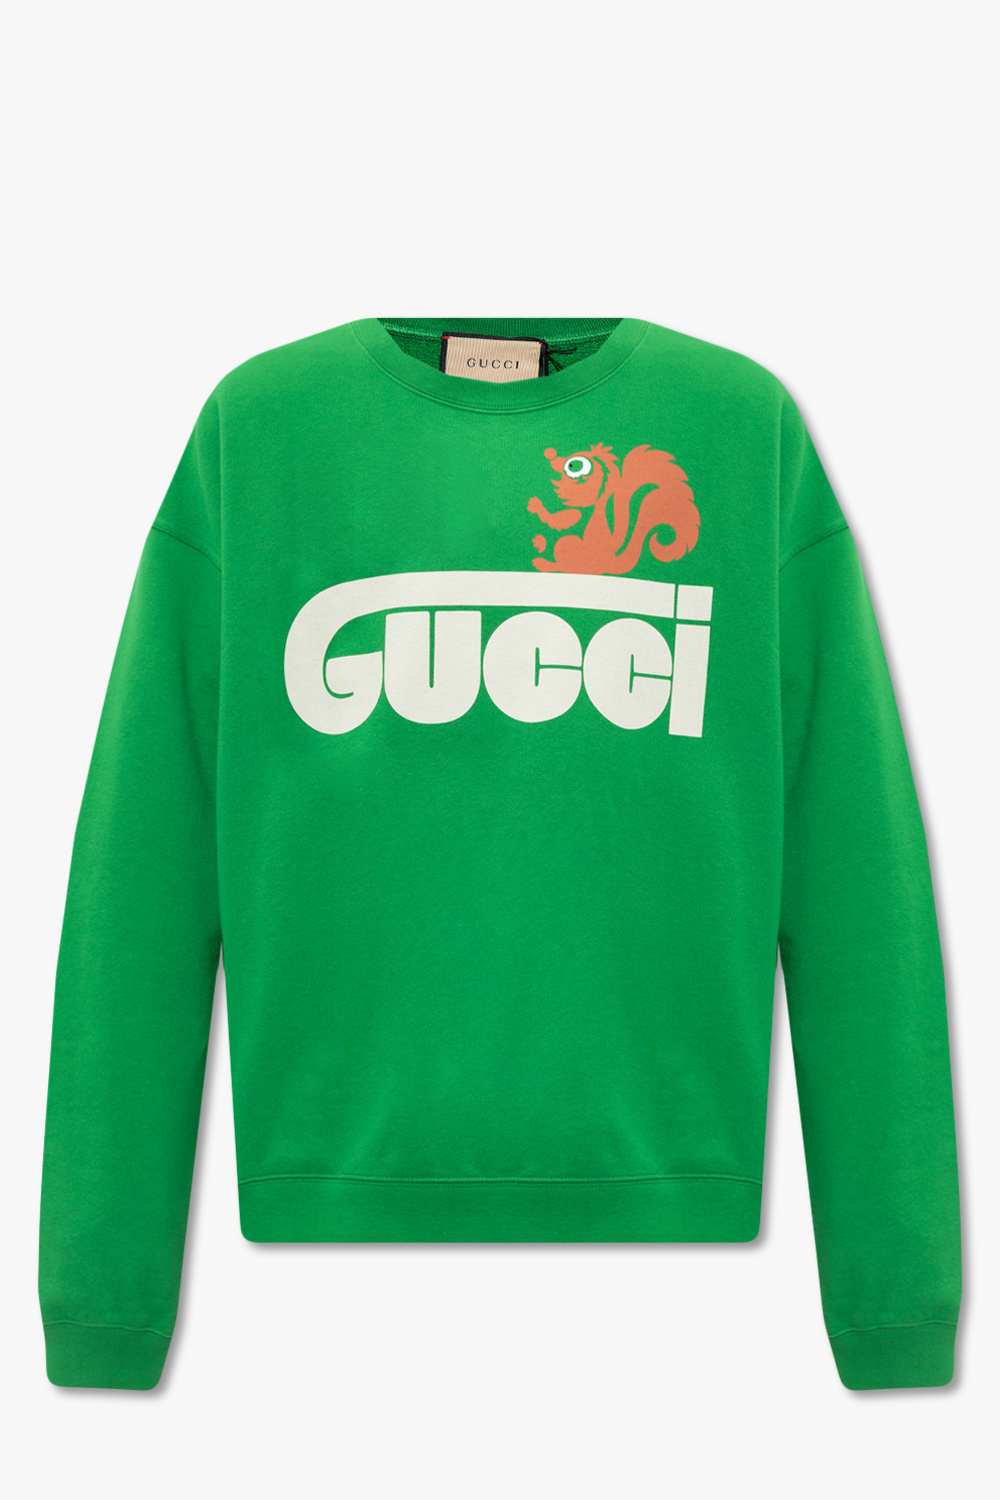 GG Gucci Cotton With Animals